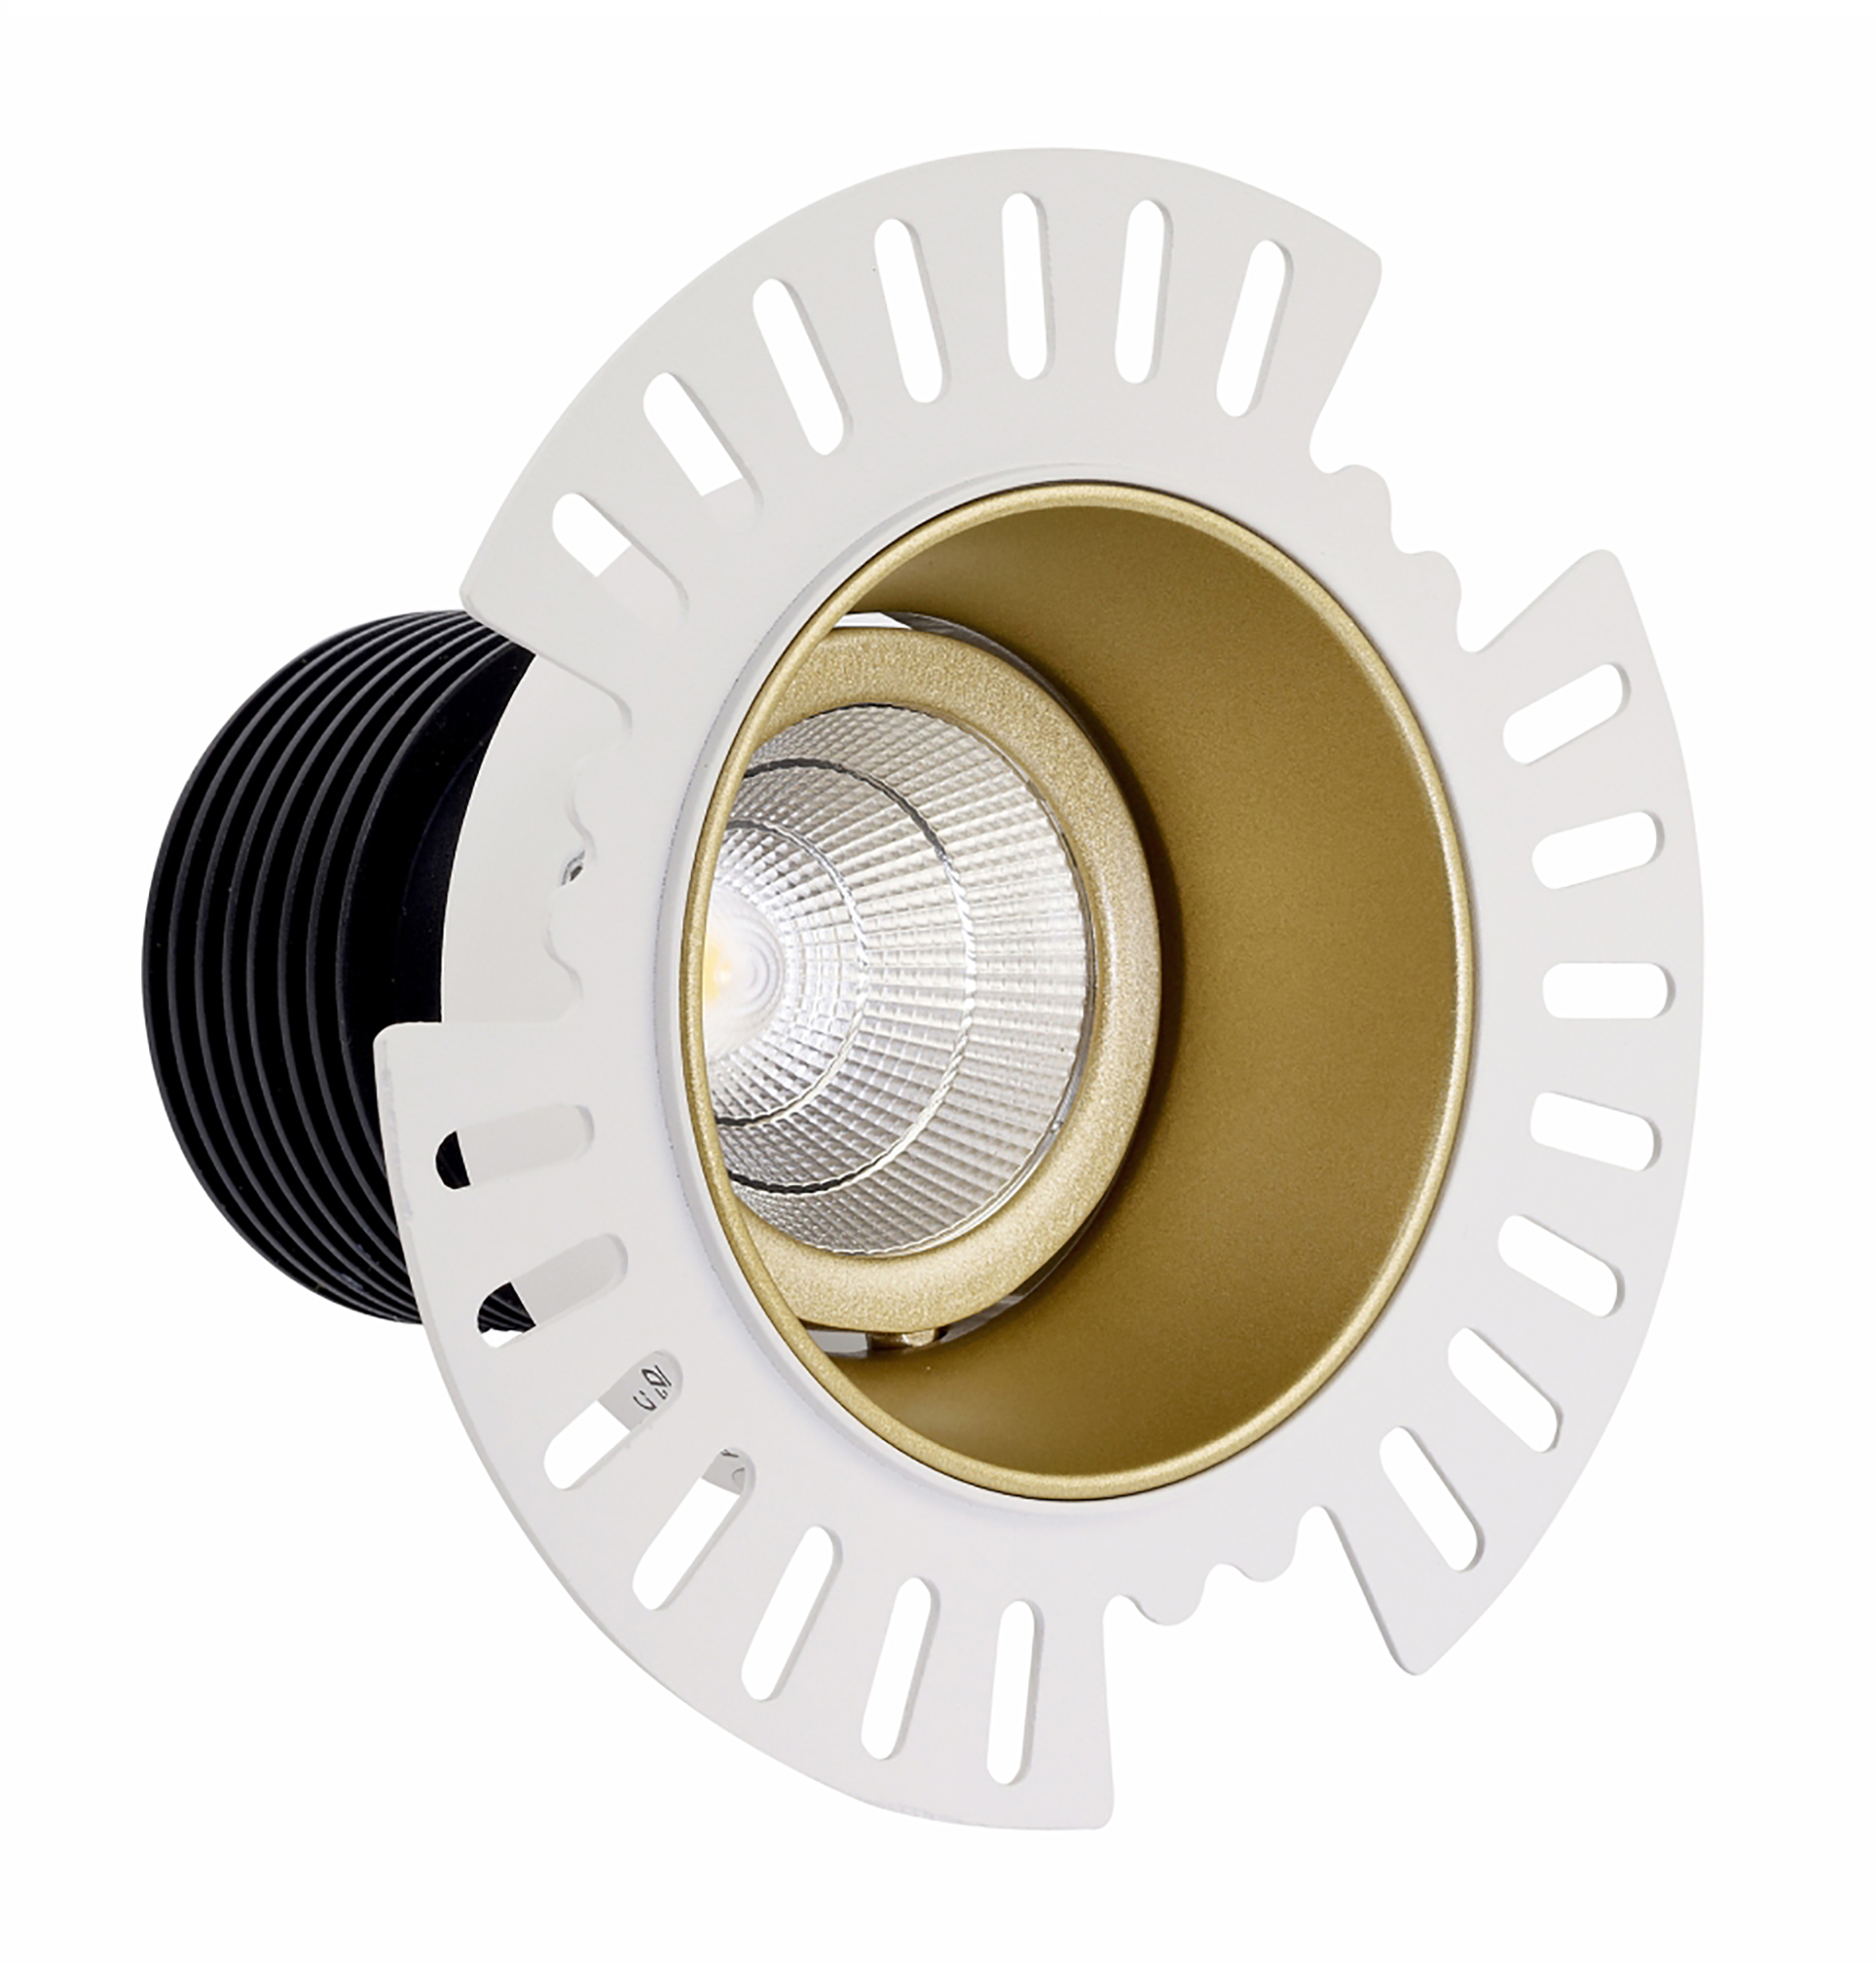 Basy A 11 Recessed Ceiling Luminaires Dlux Round Recess Ceiling